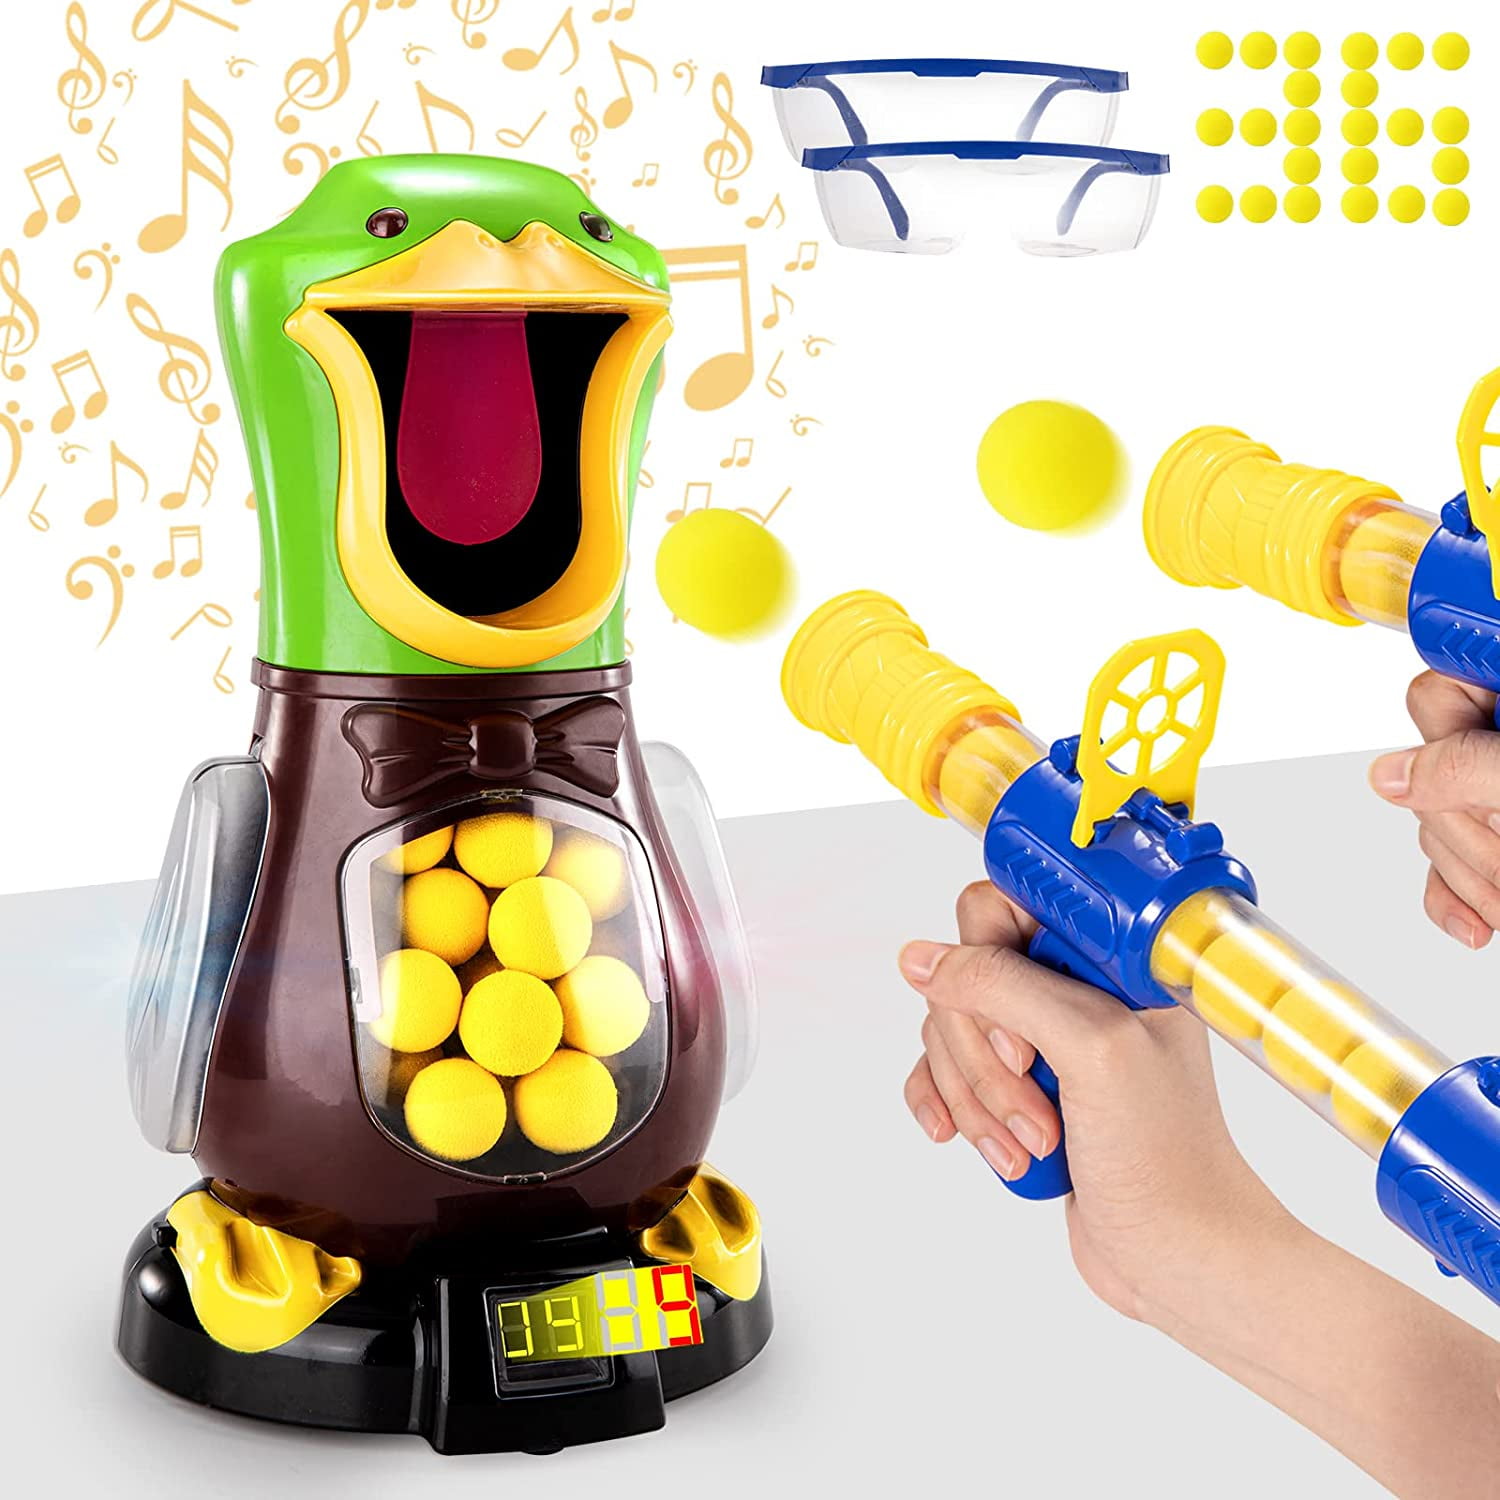 Duck Shooting Toys for Kids 3-5 Years, 2 Packs of Toy Foam Blasters with Movable Target, Interactive Competition Game Gift for Boys and Girls Ages 6 7 8 9+ Years Old